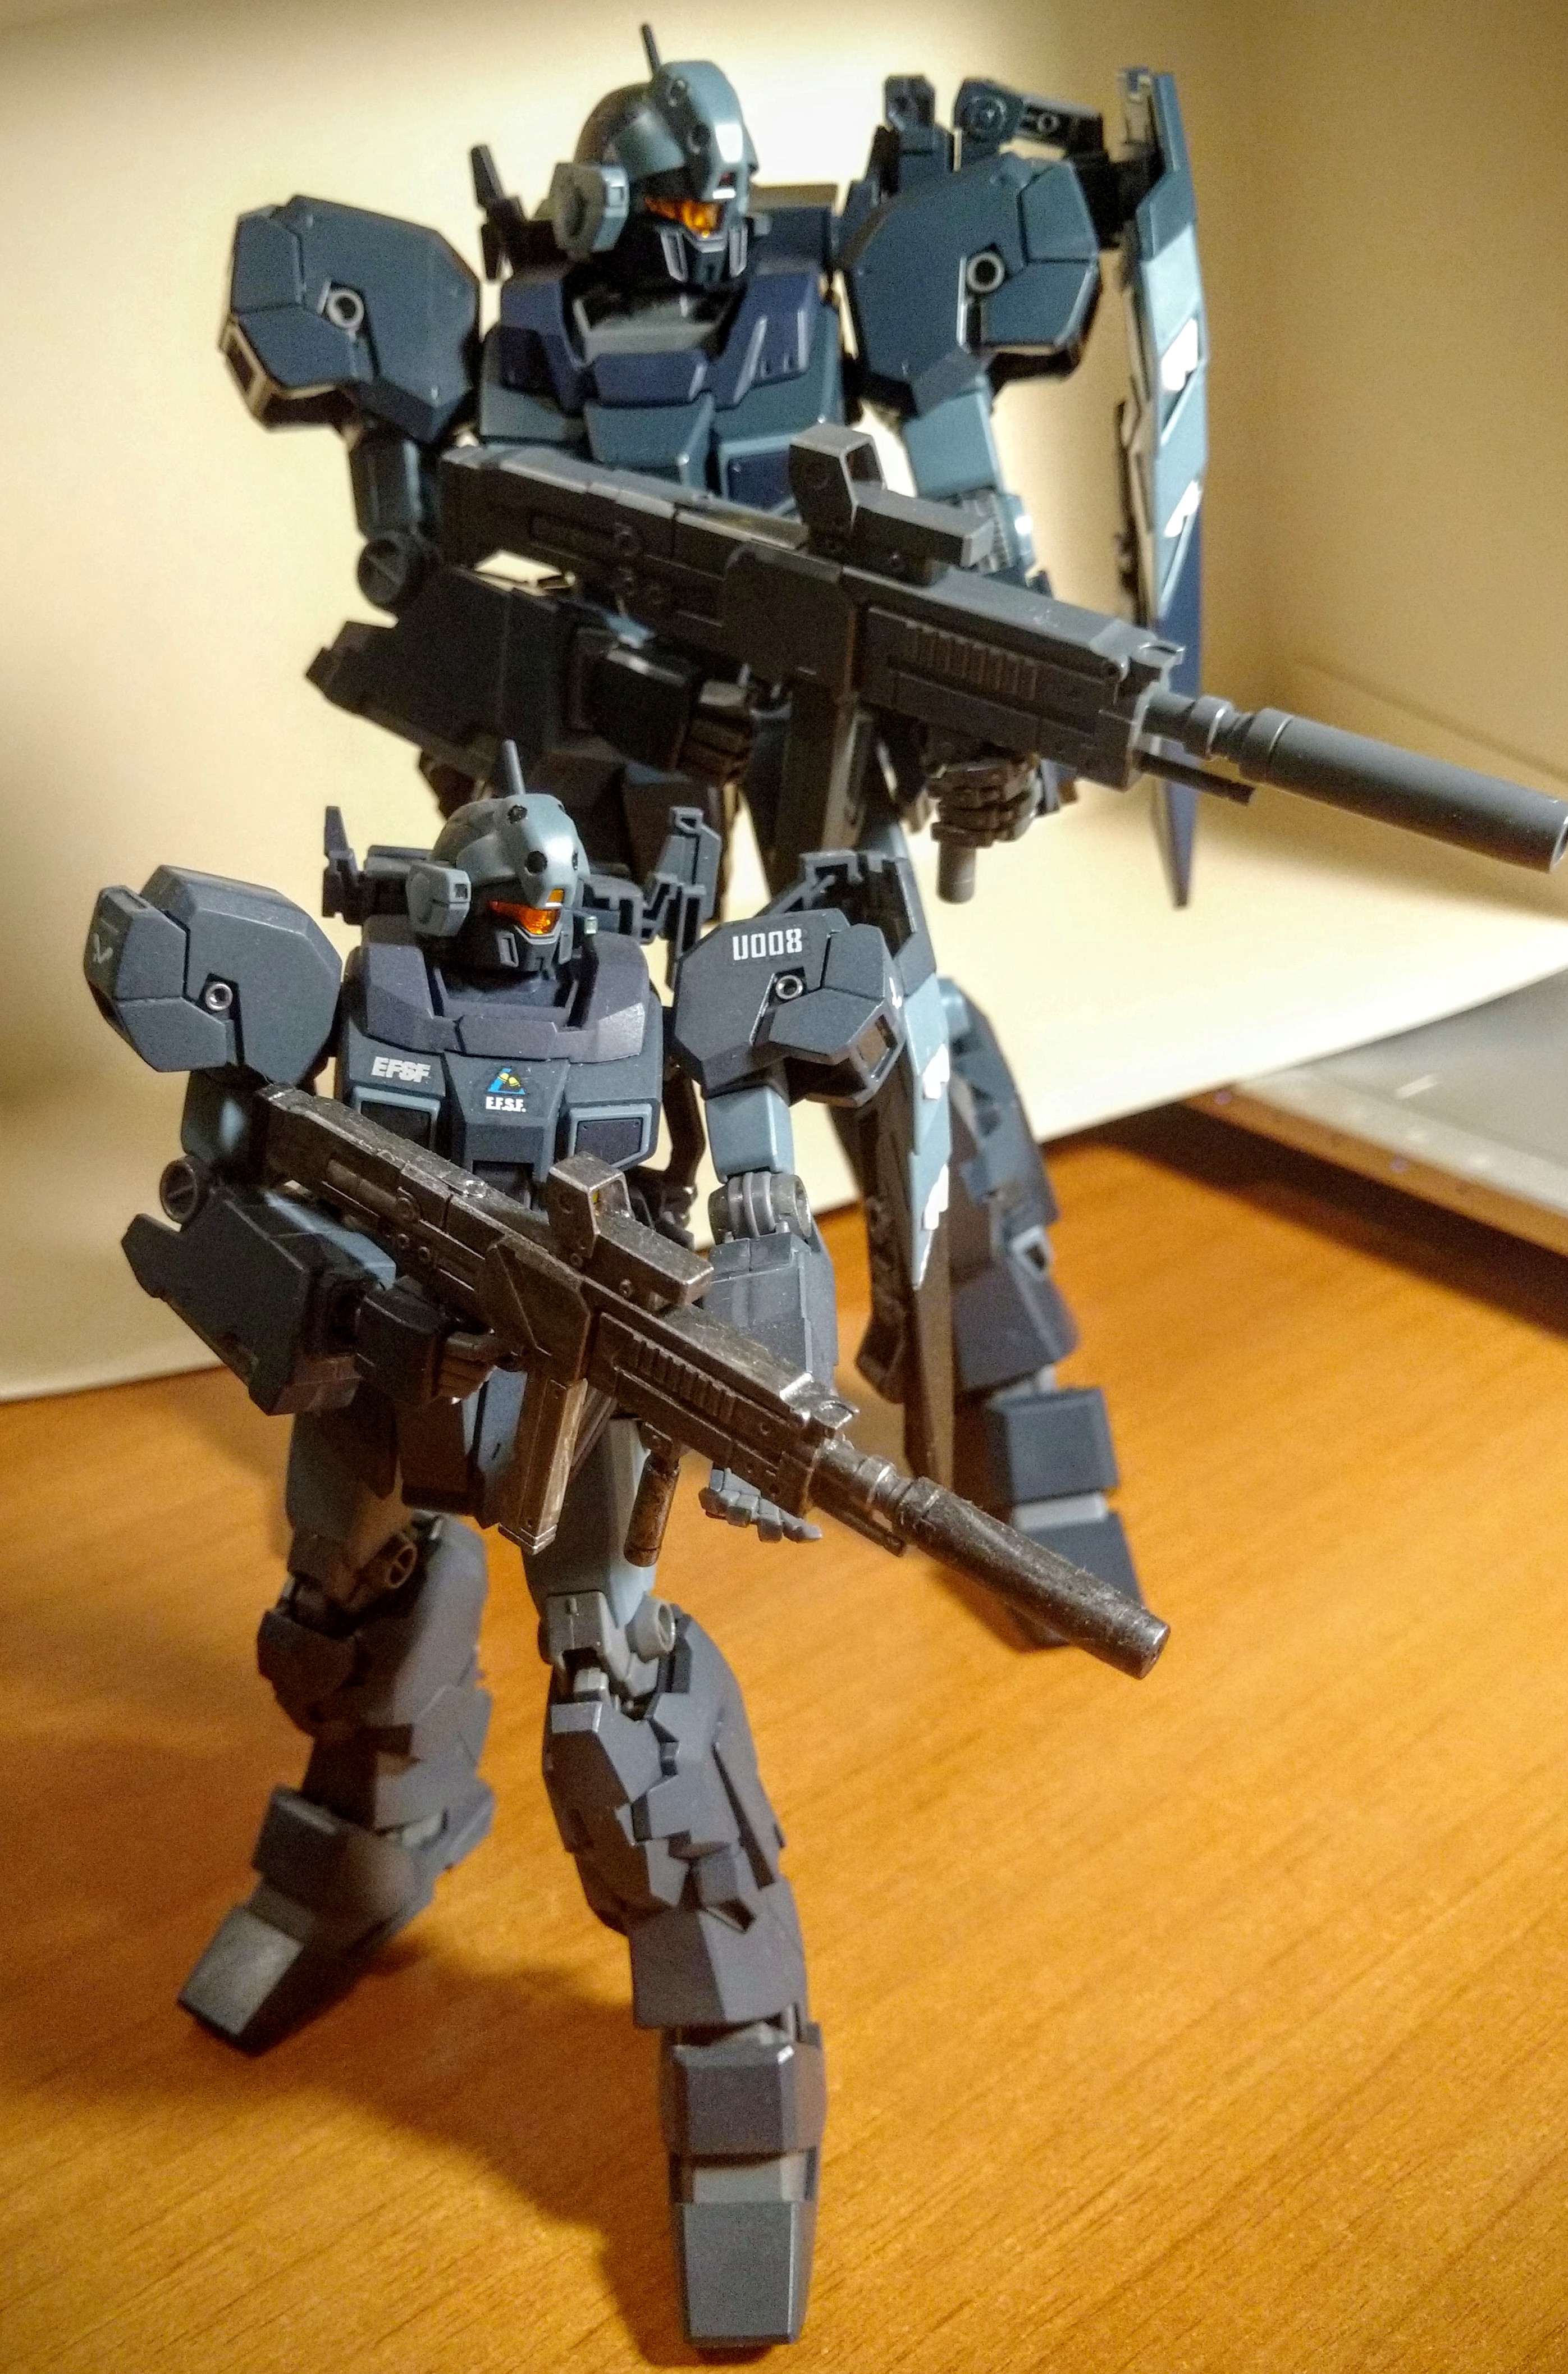 The same Mobile Suit model in 1/144 and 1/100